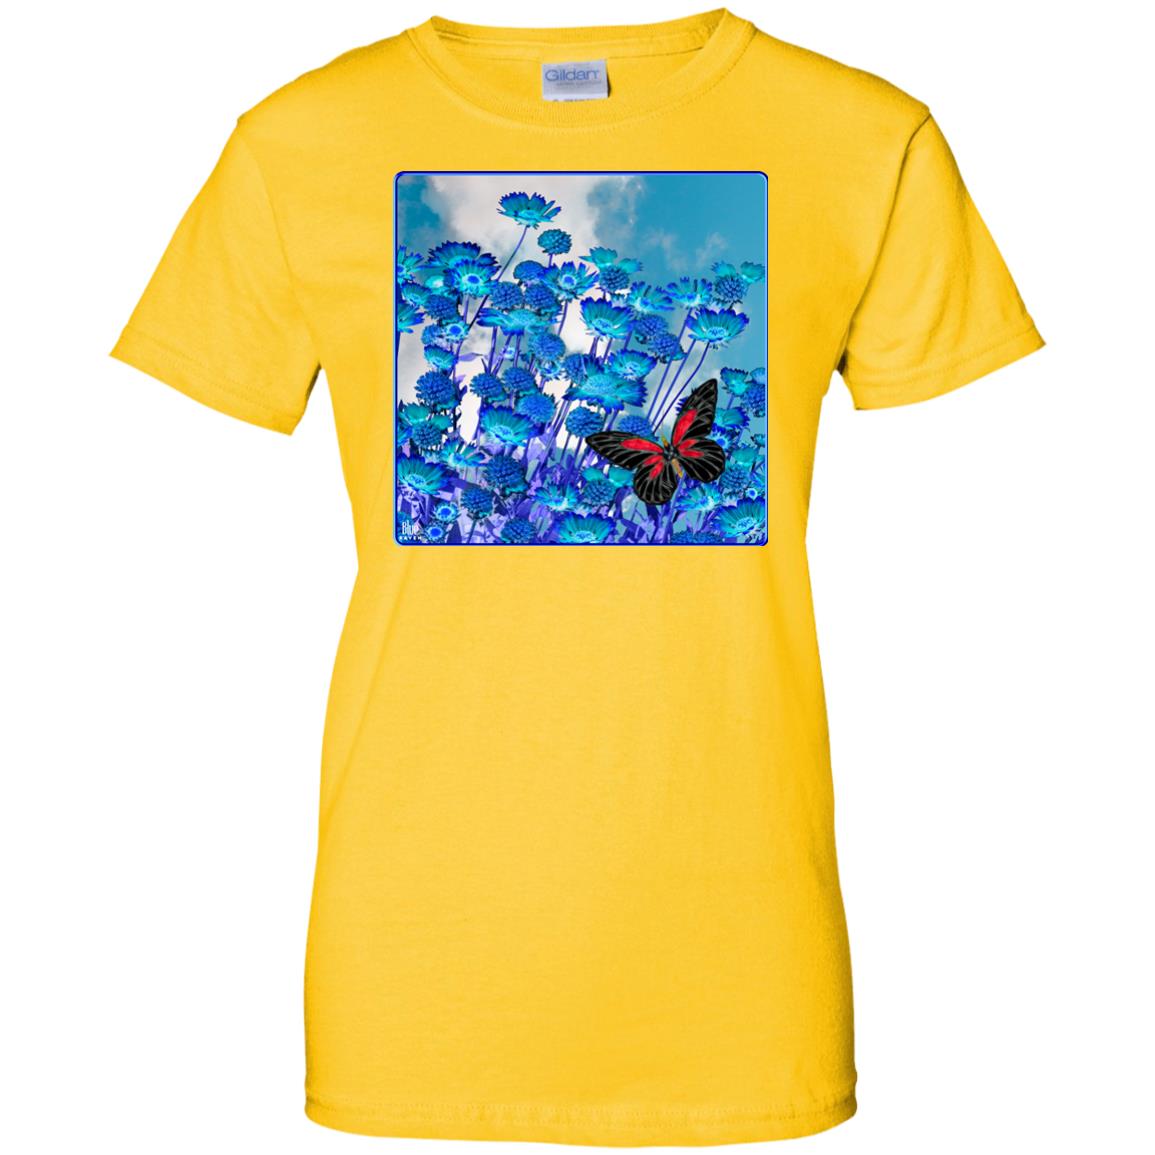 Blue Daisies - Women's Relaxed Fit T-Shirt